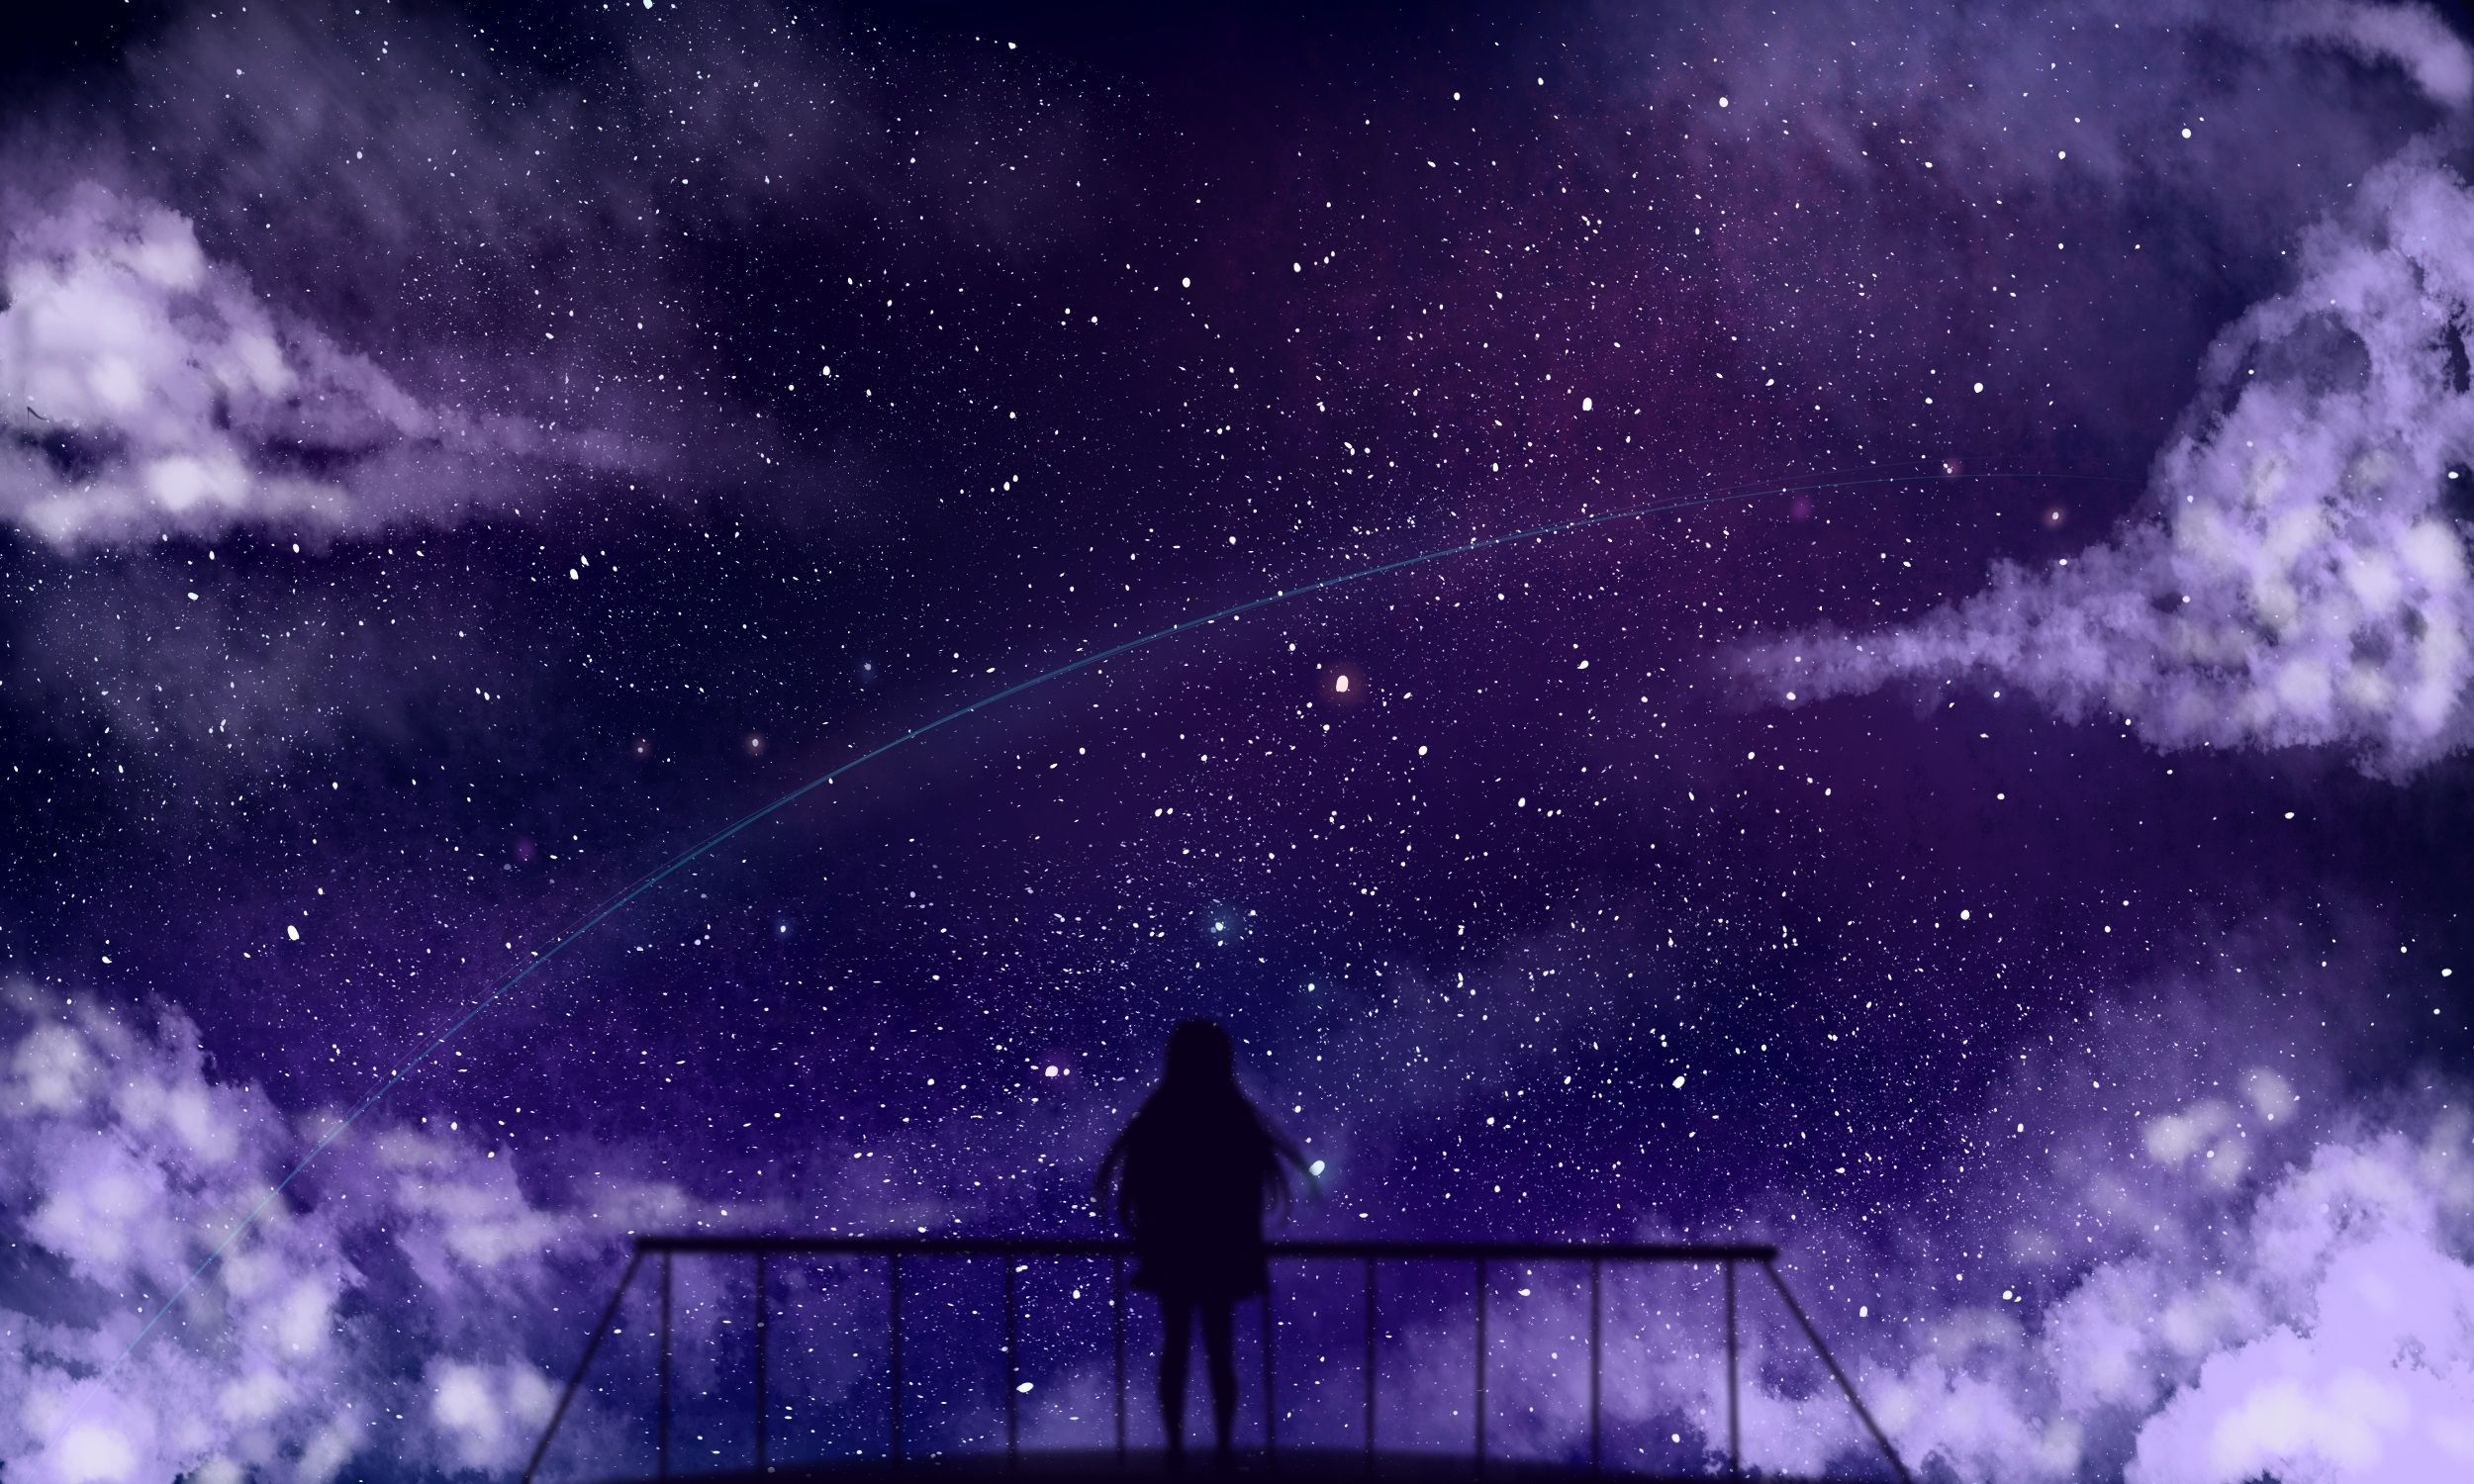 Download 2500x1500 Anime Girl, Stars, Clouds, Fence, Silhouette Wallpaper